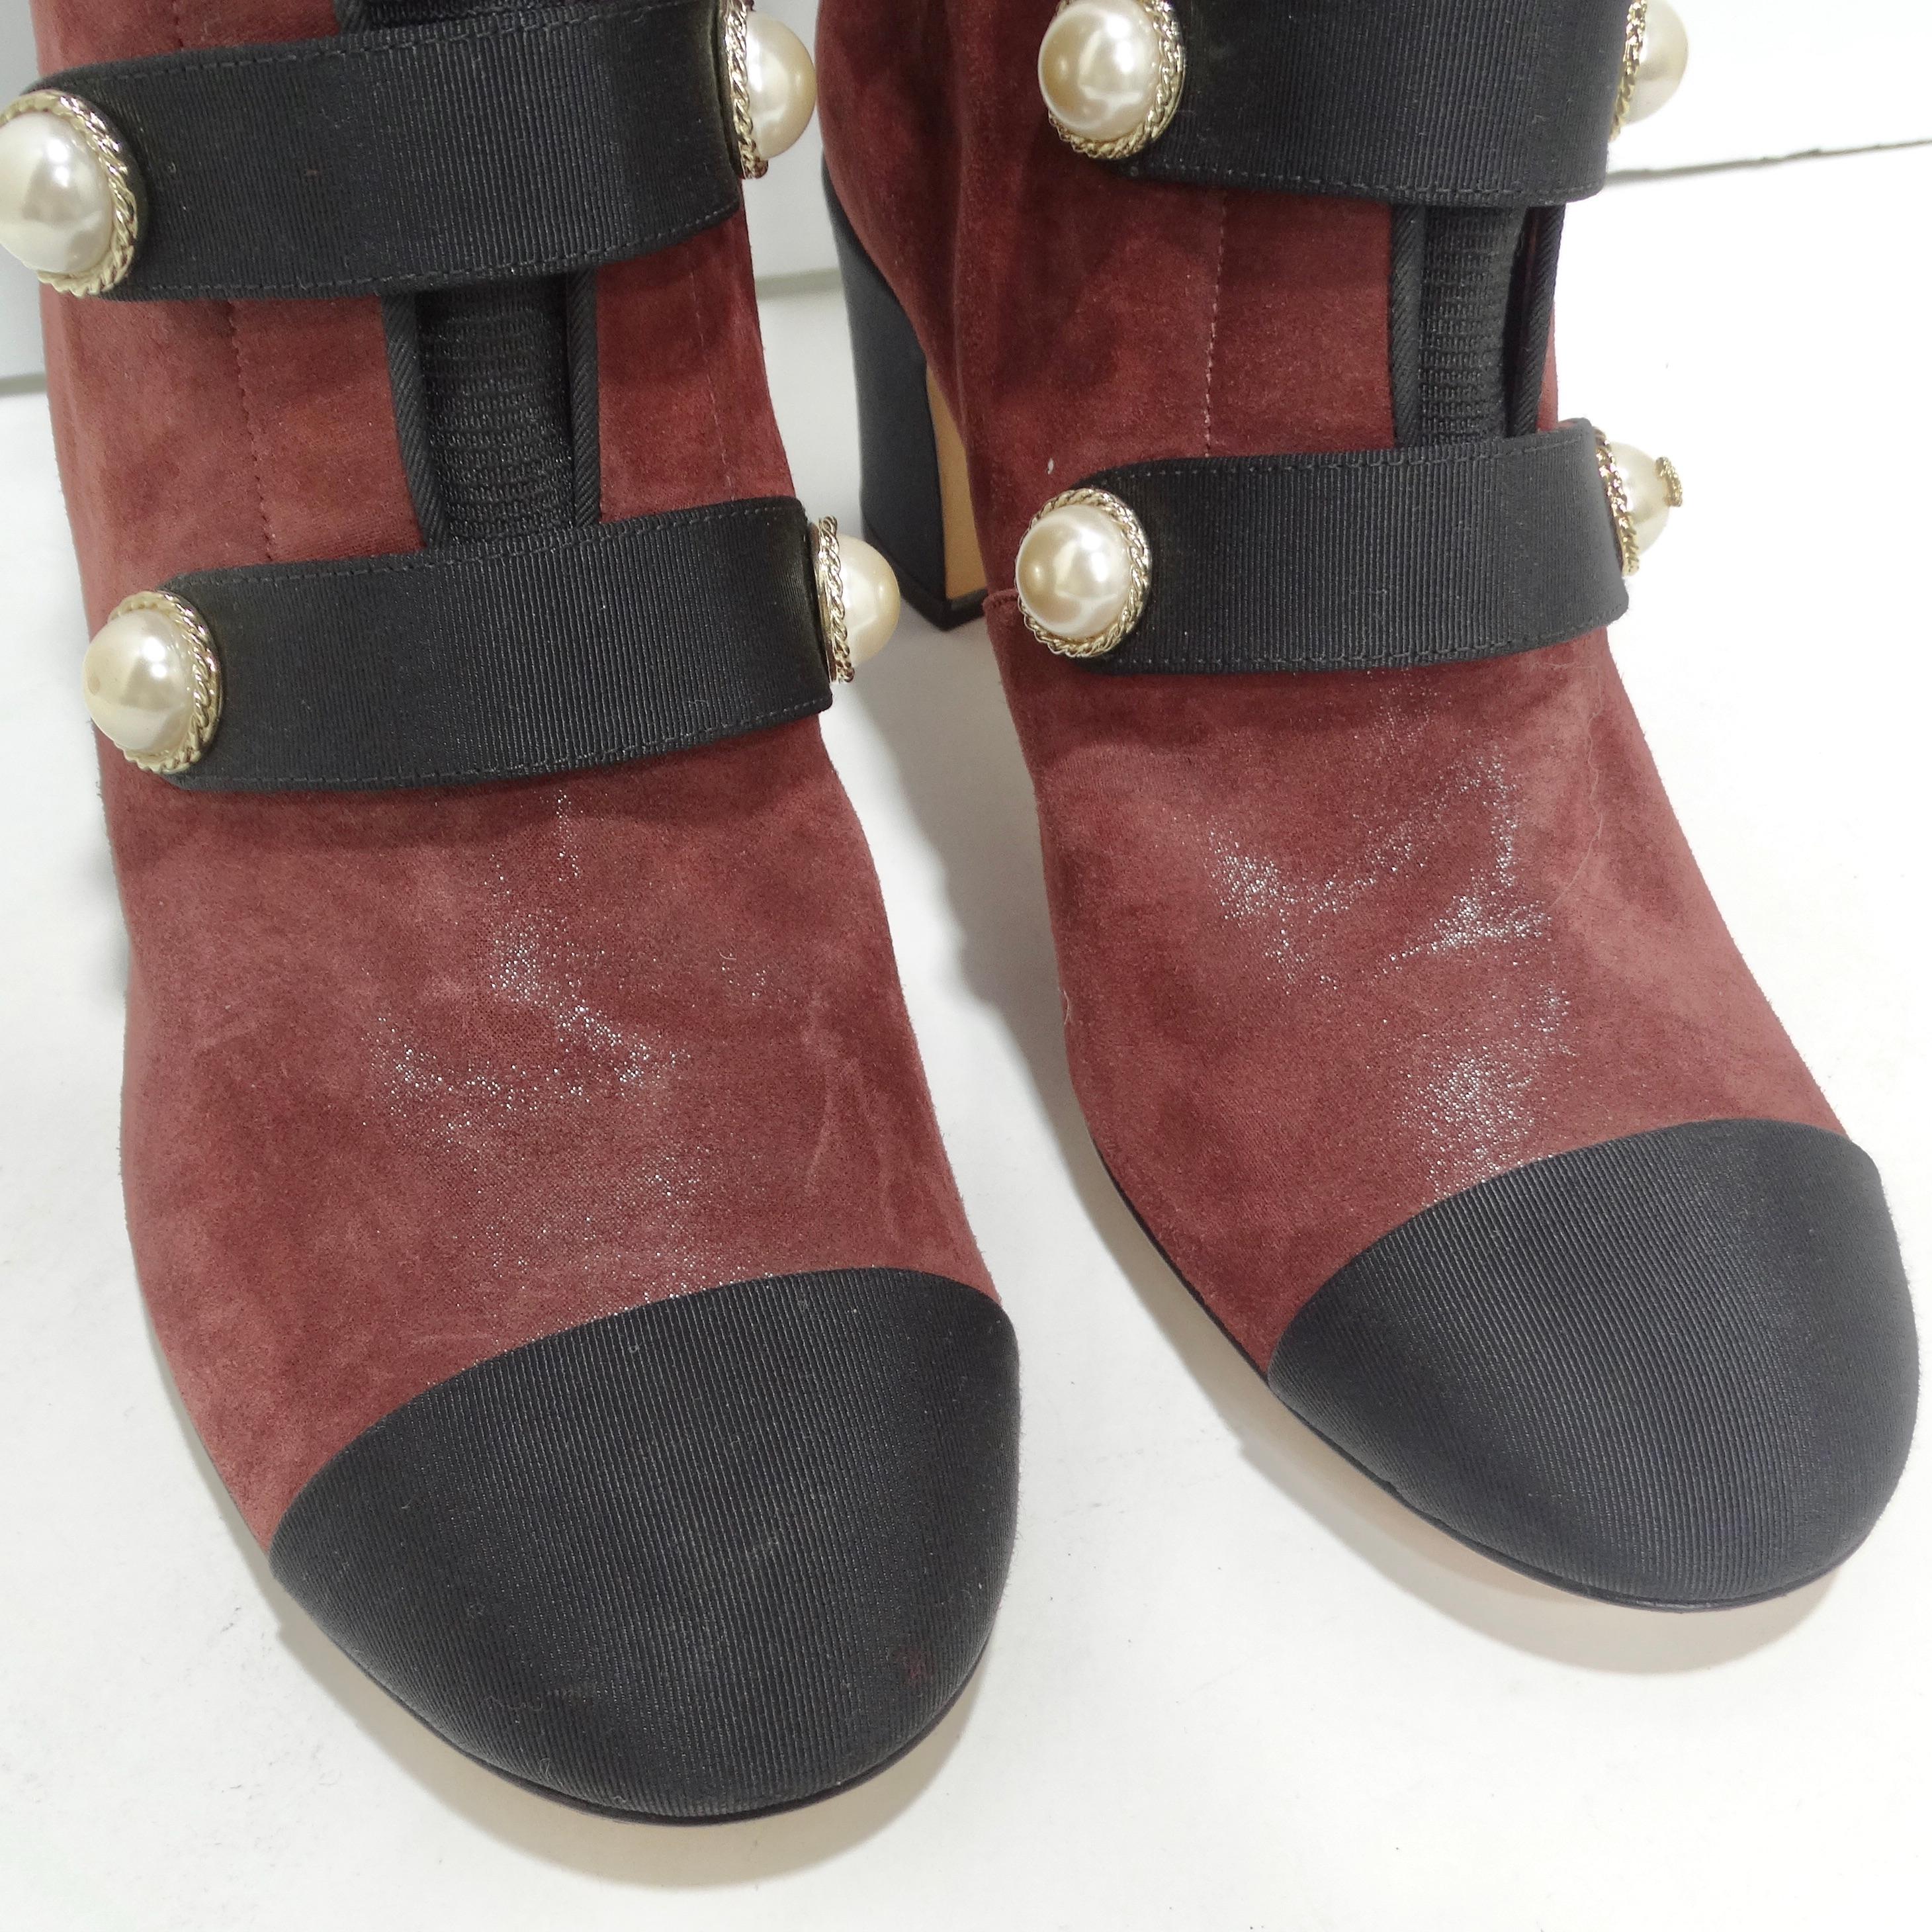 Chanel Russian Collection Bordeaux Boots In Excellent Condition For Sale In Scottsdale, AZ